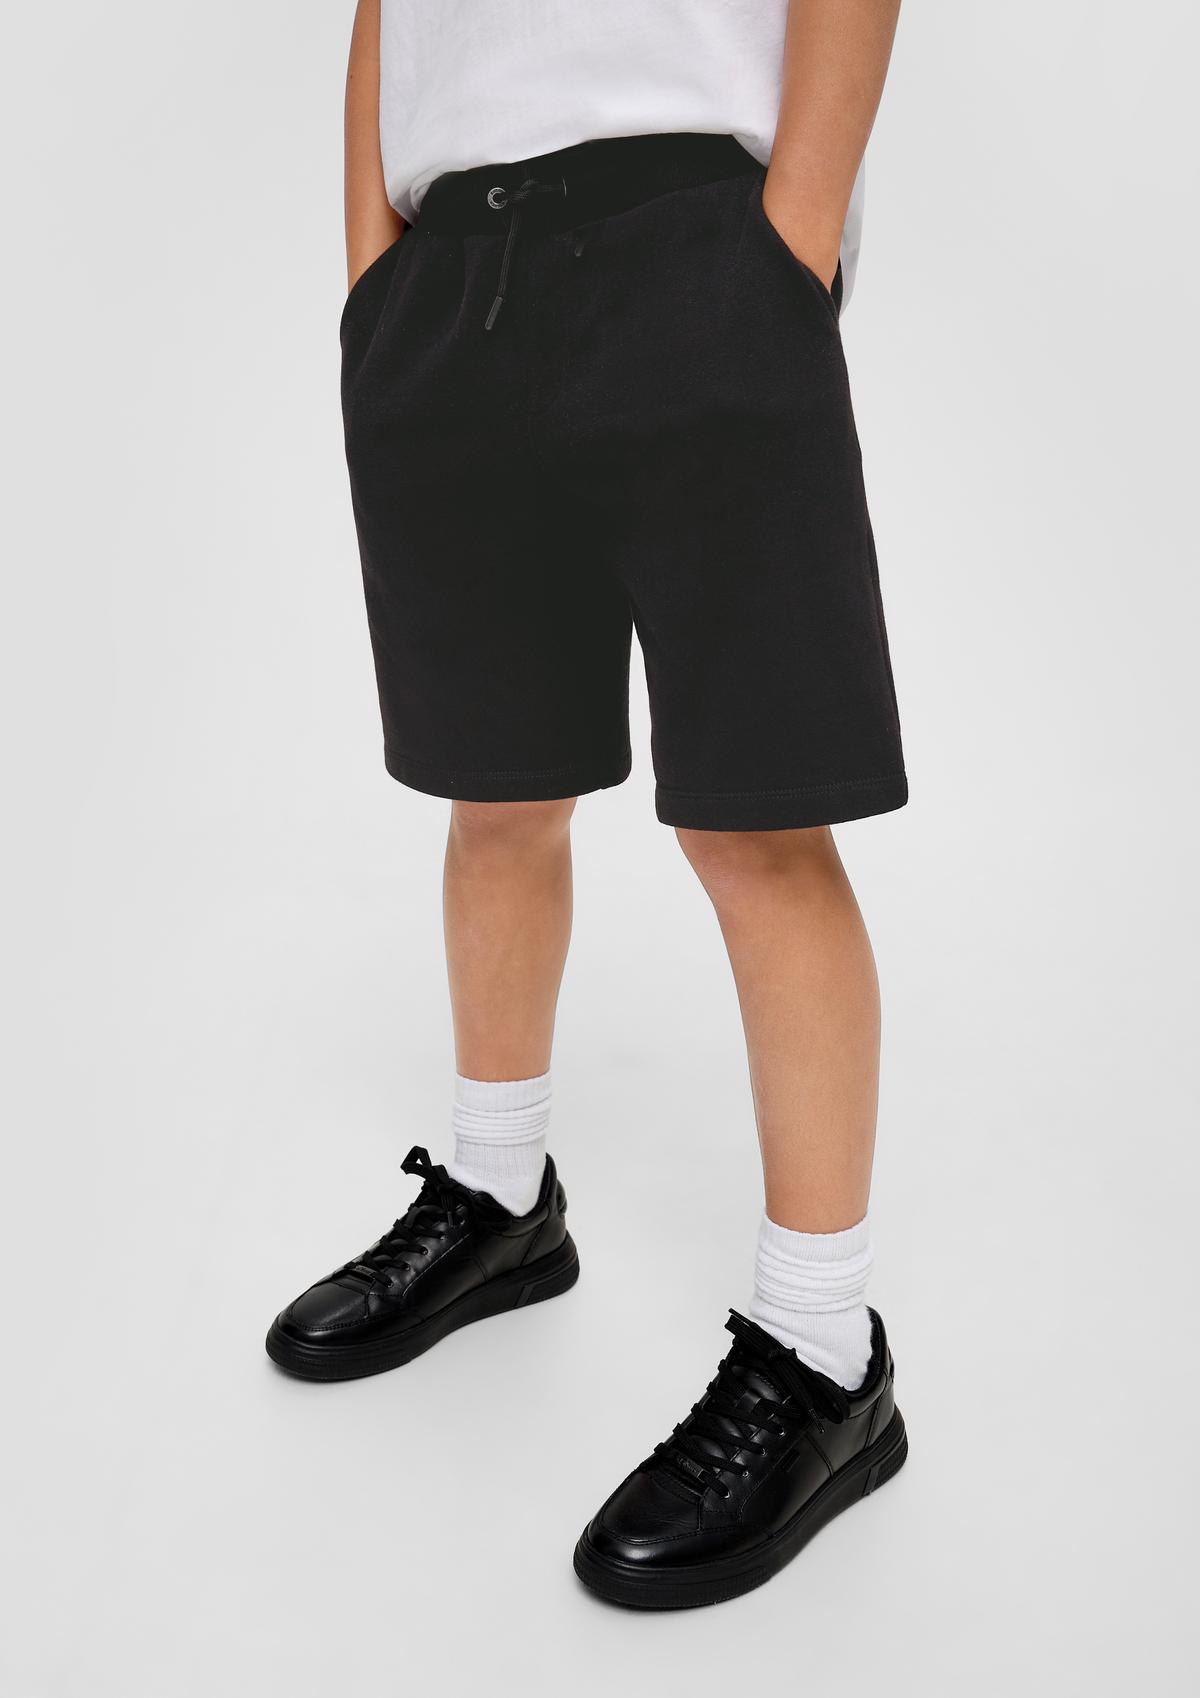 shorts Bermuda for boys and teens Find online